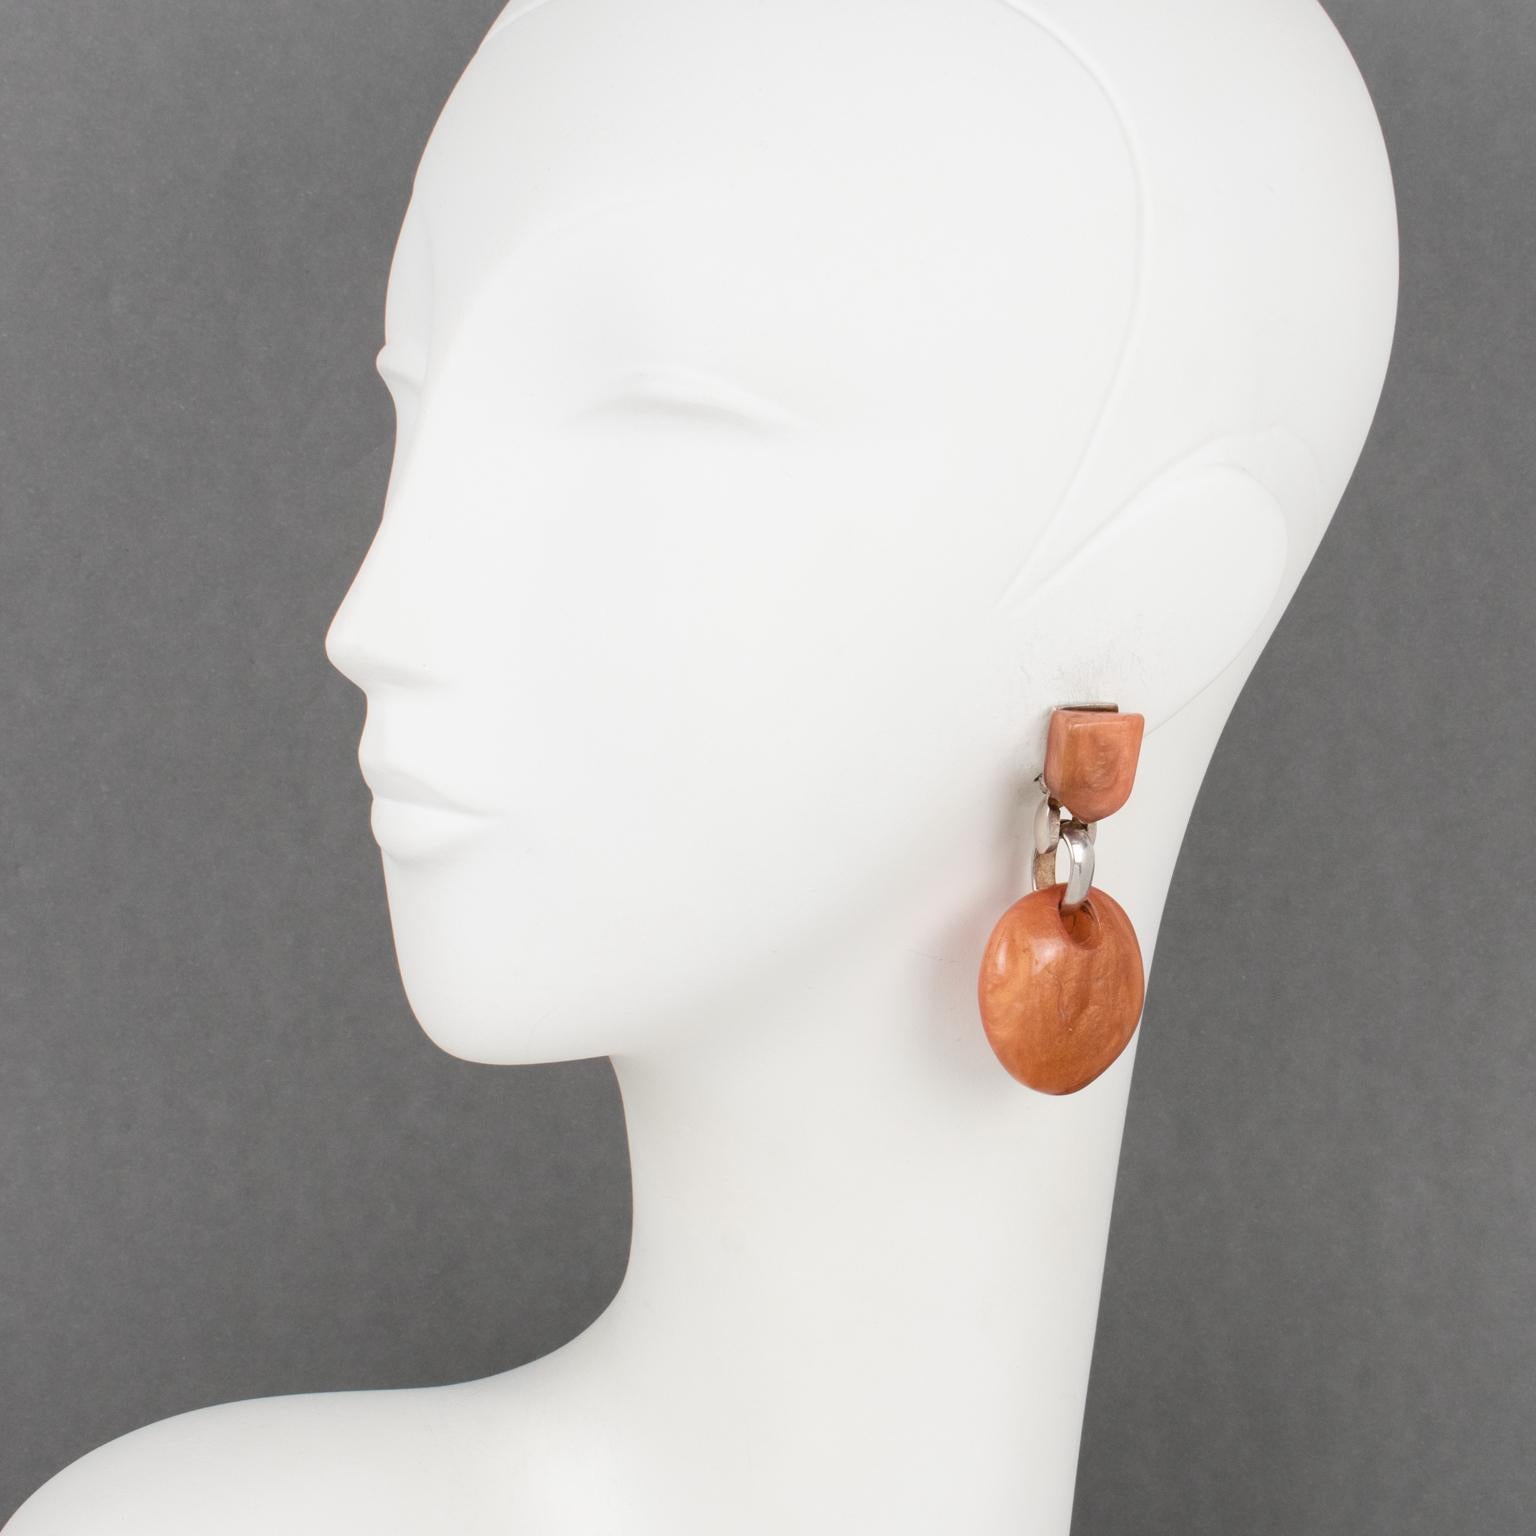 Dominique Denaive Paris crafted these elegant dangle clip-on earrings in his craft shop in France. The pieces boast a dangling-drop shape in pearlized resin with rounded pebbles in a lovely orange cantaloupe color. The hardware is in silvered metal.